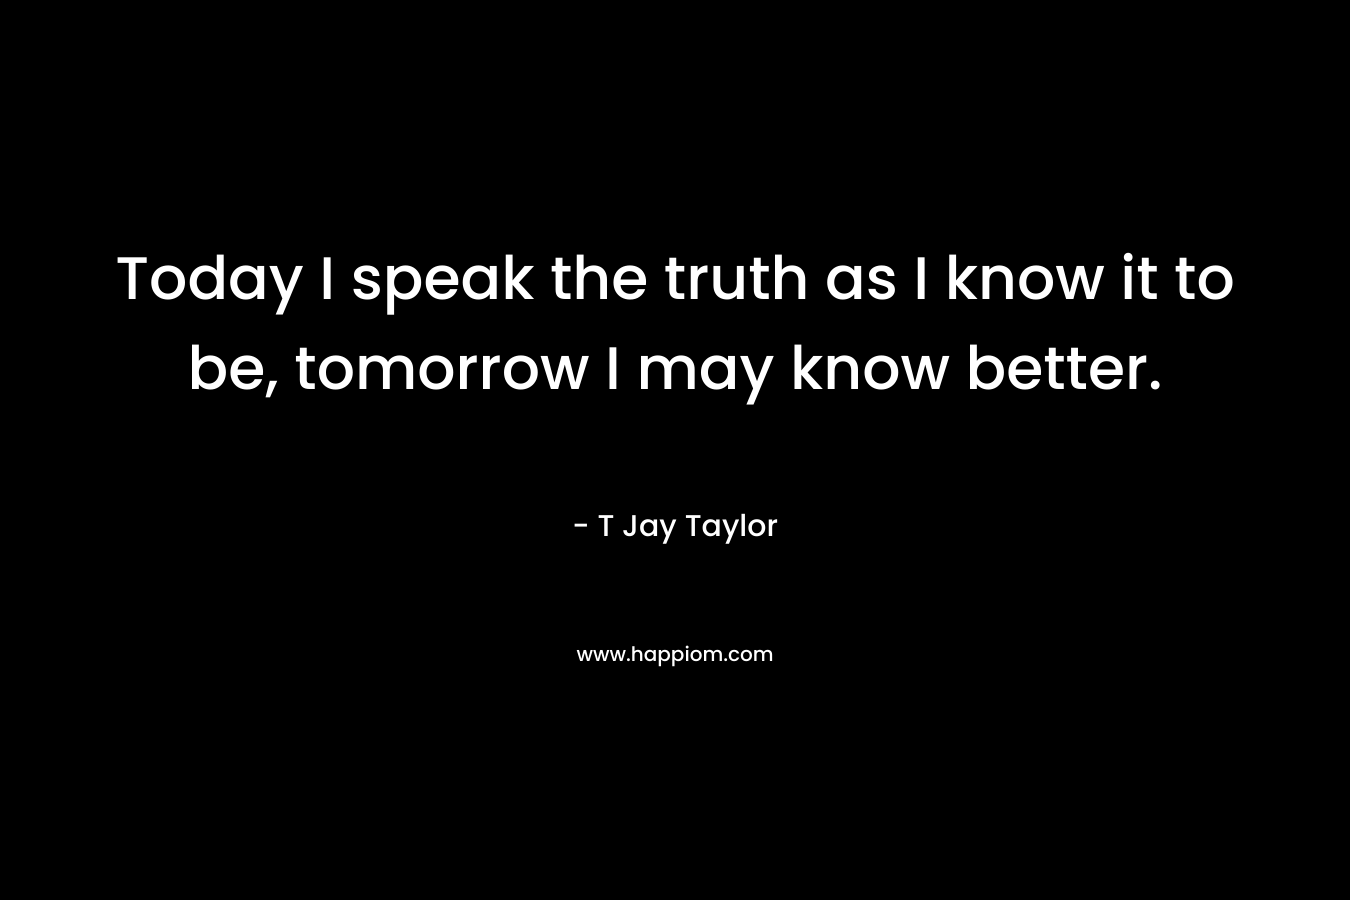 Today I speak the truth as I know it to be, tomorrow I may know better.